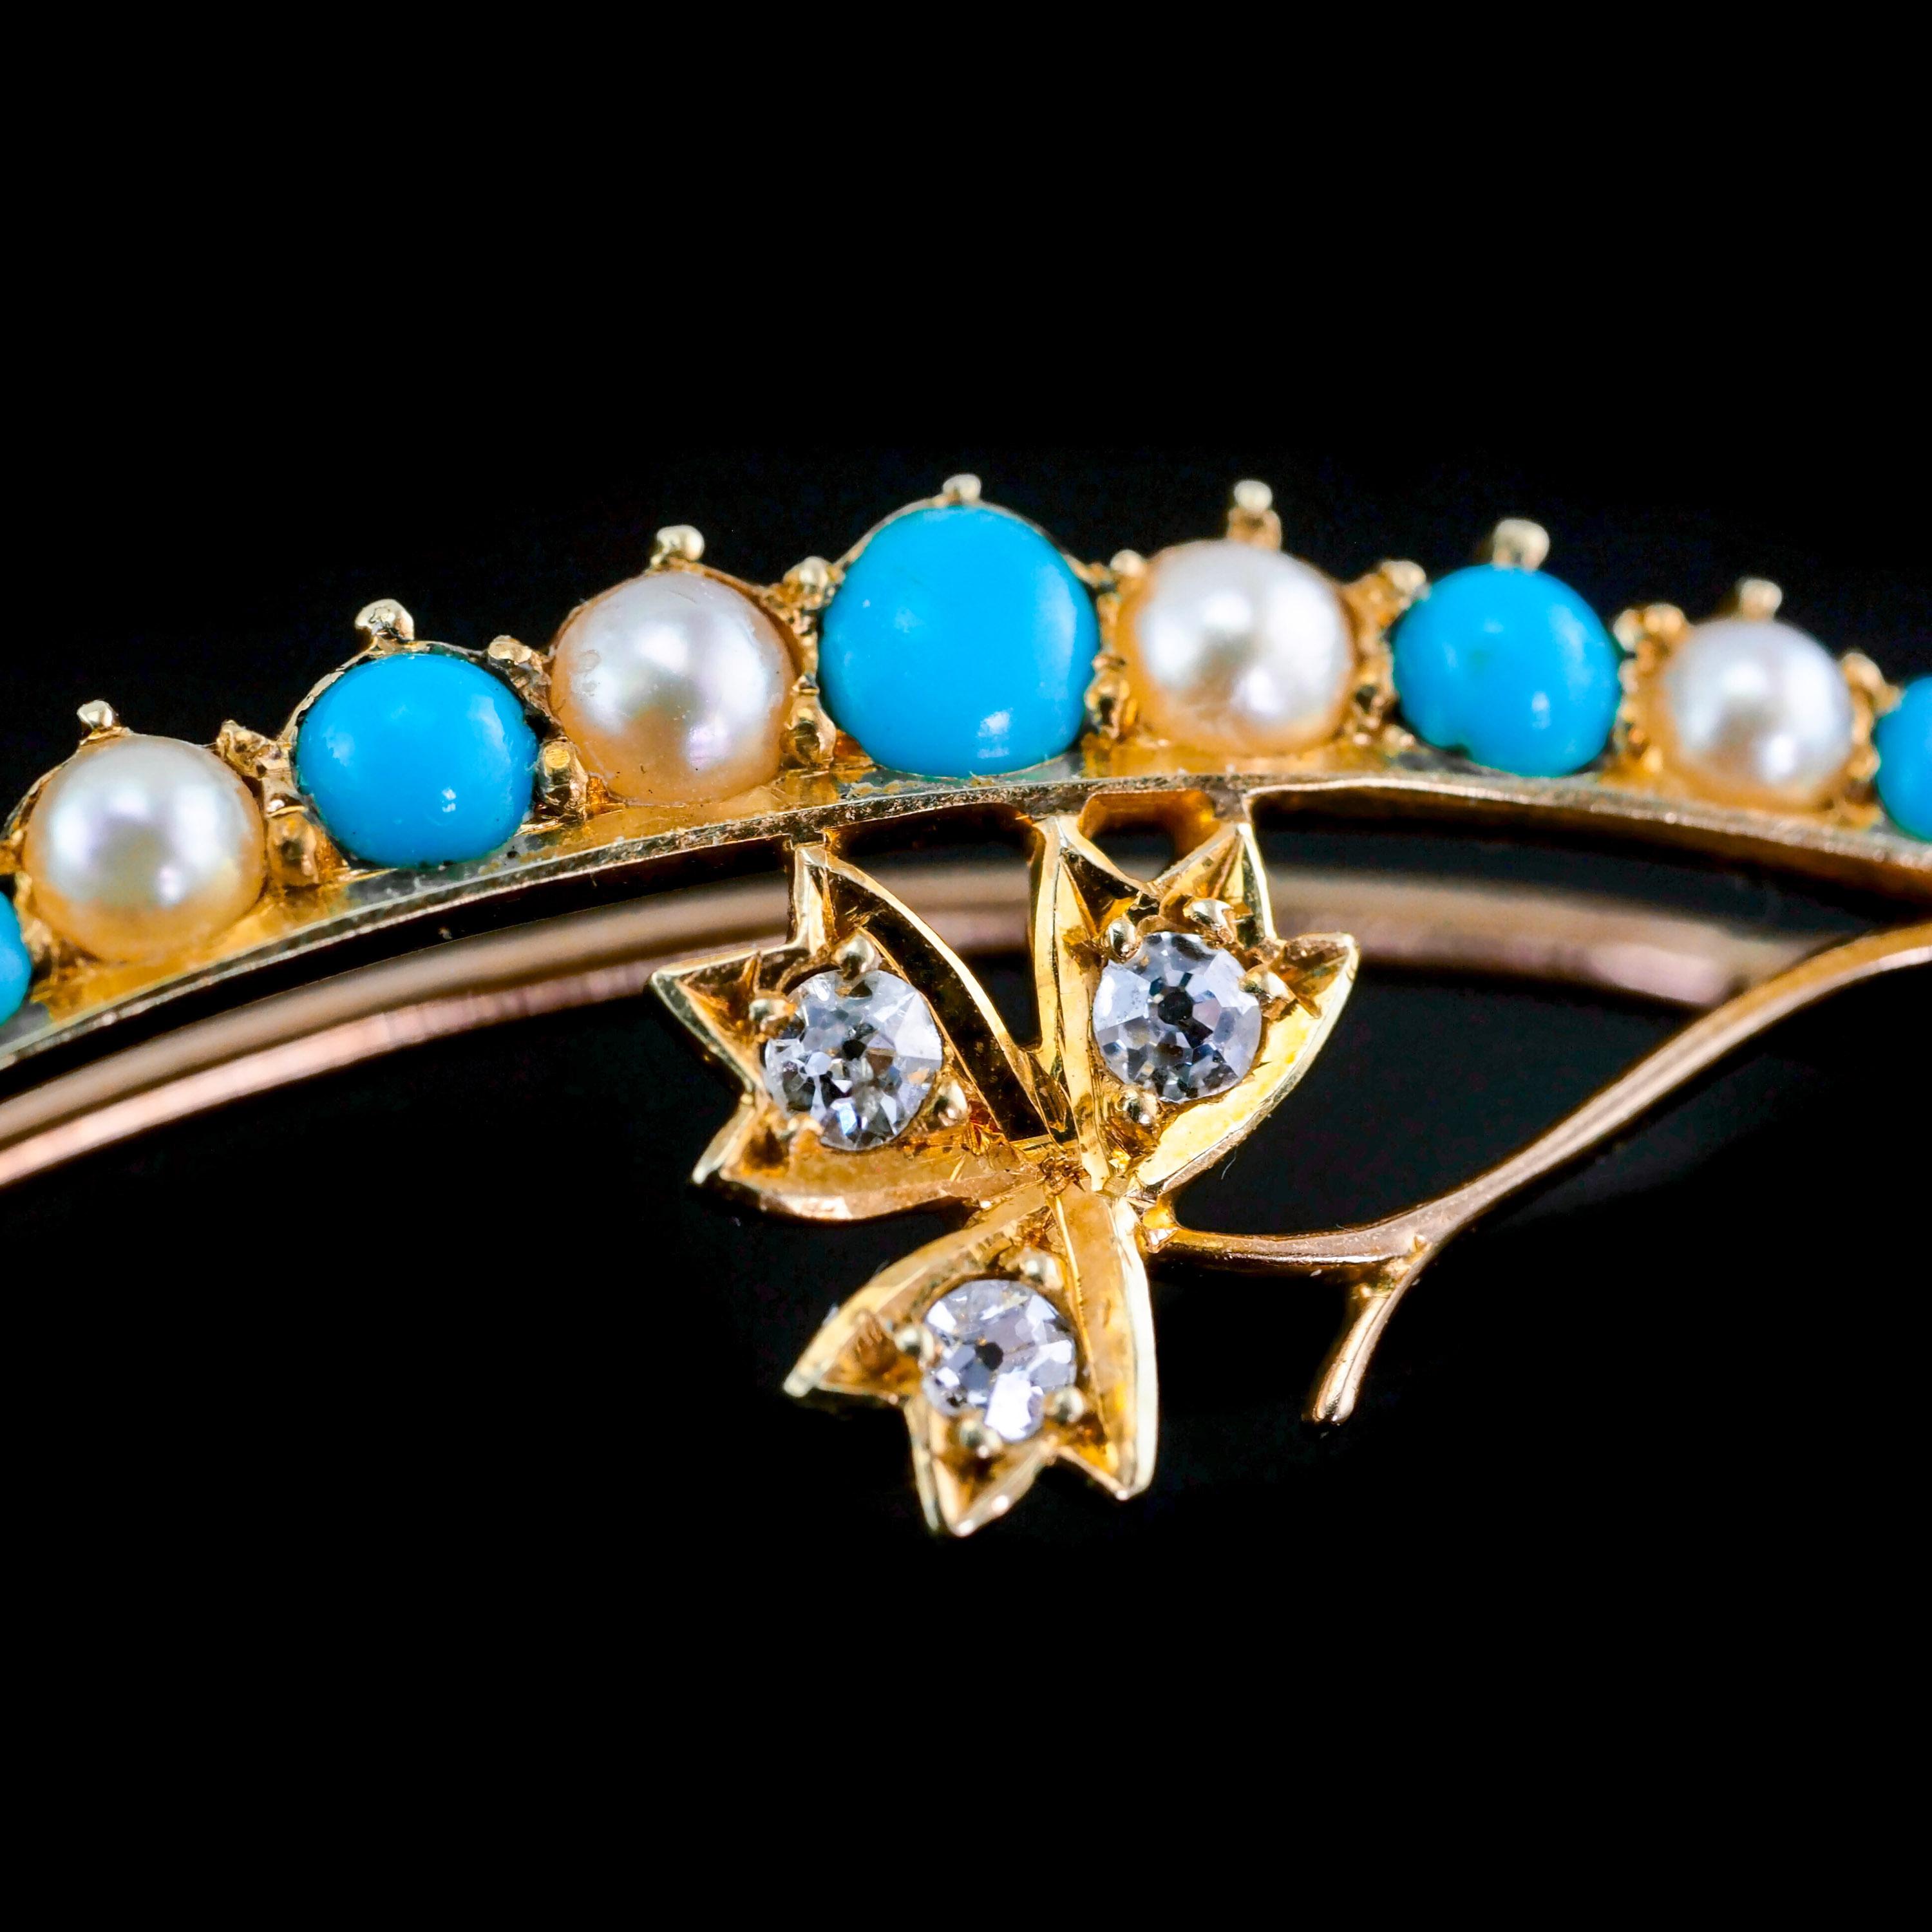 Antique Victorian 15k Gold Turquoise, Pearl & Diamond Crescent Brooch, c.1900 For Sale 12